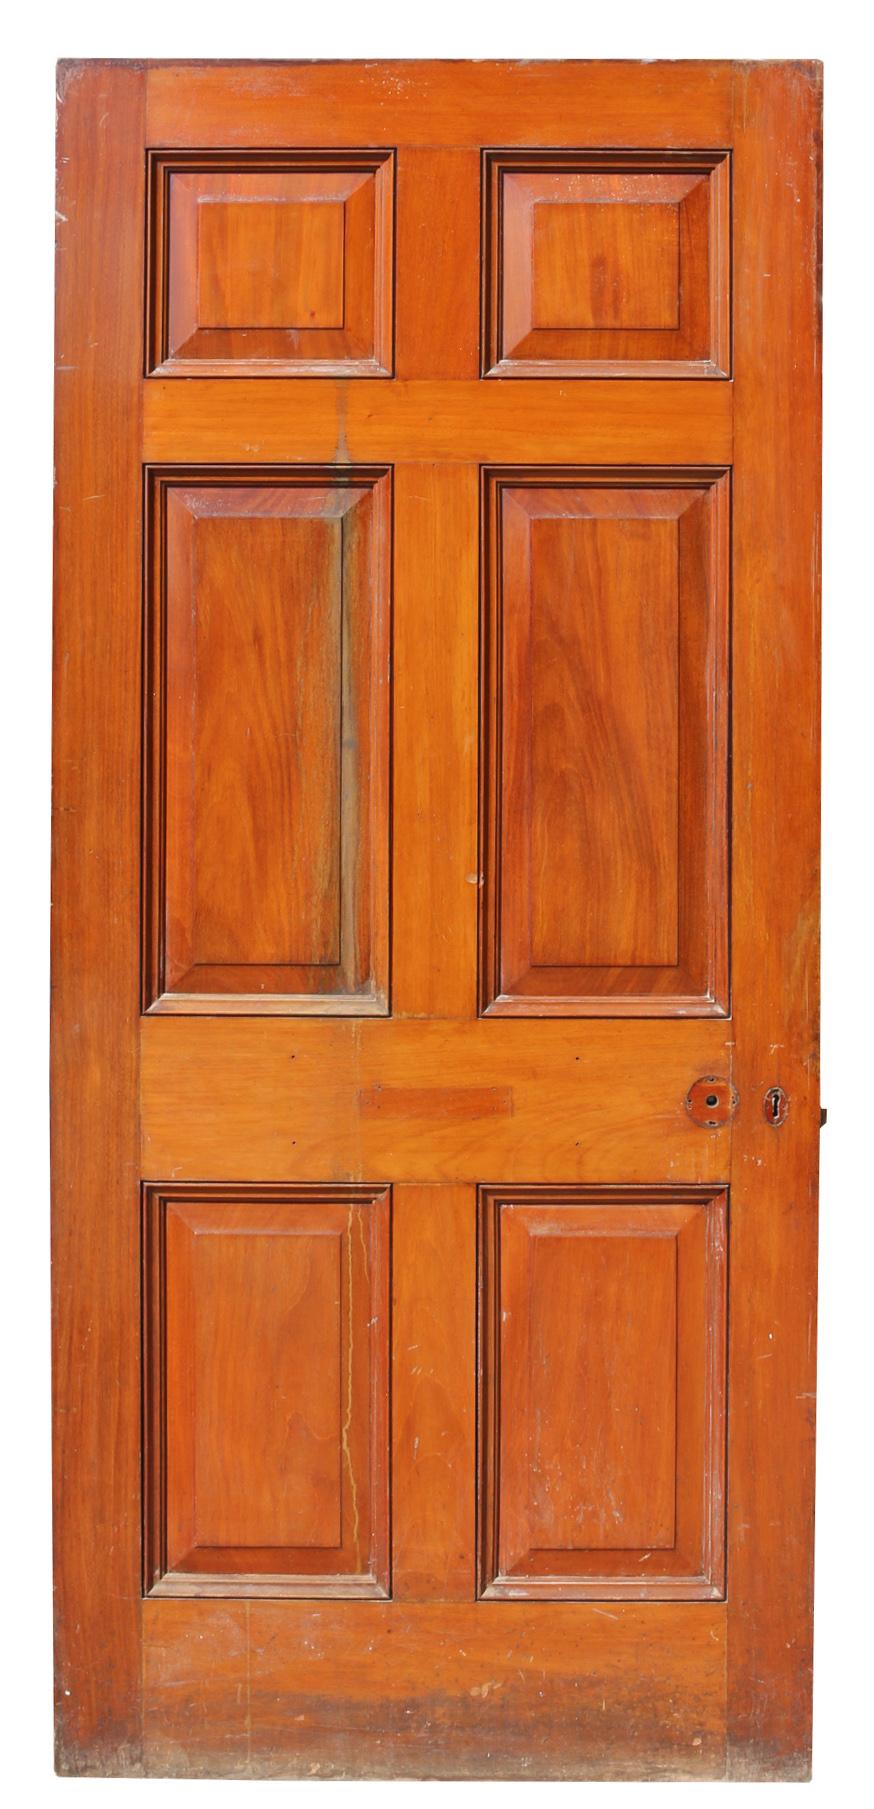 A substantially constructed Georgian style solid Mahogany door. This door is of six panel configuration with raised and fielded panels.